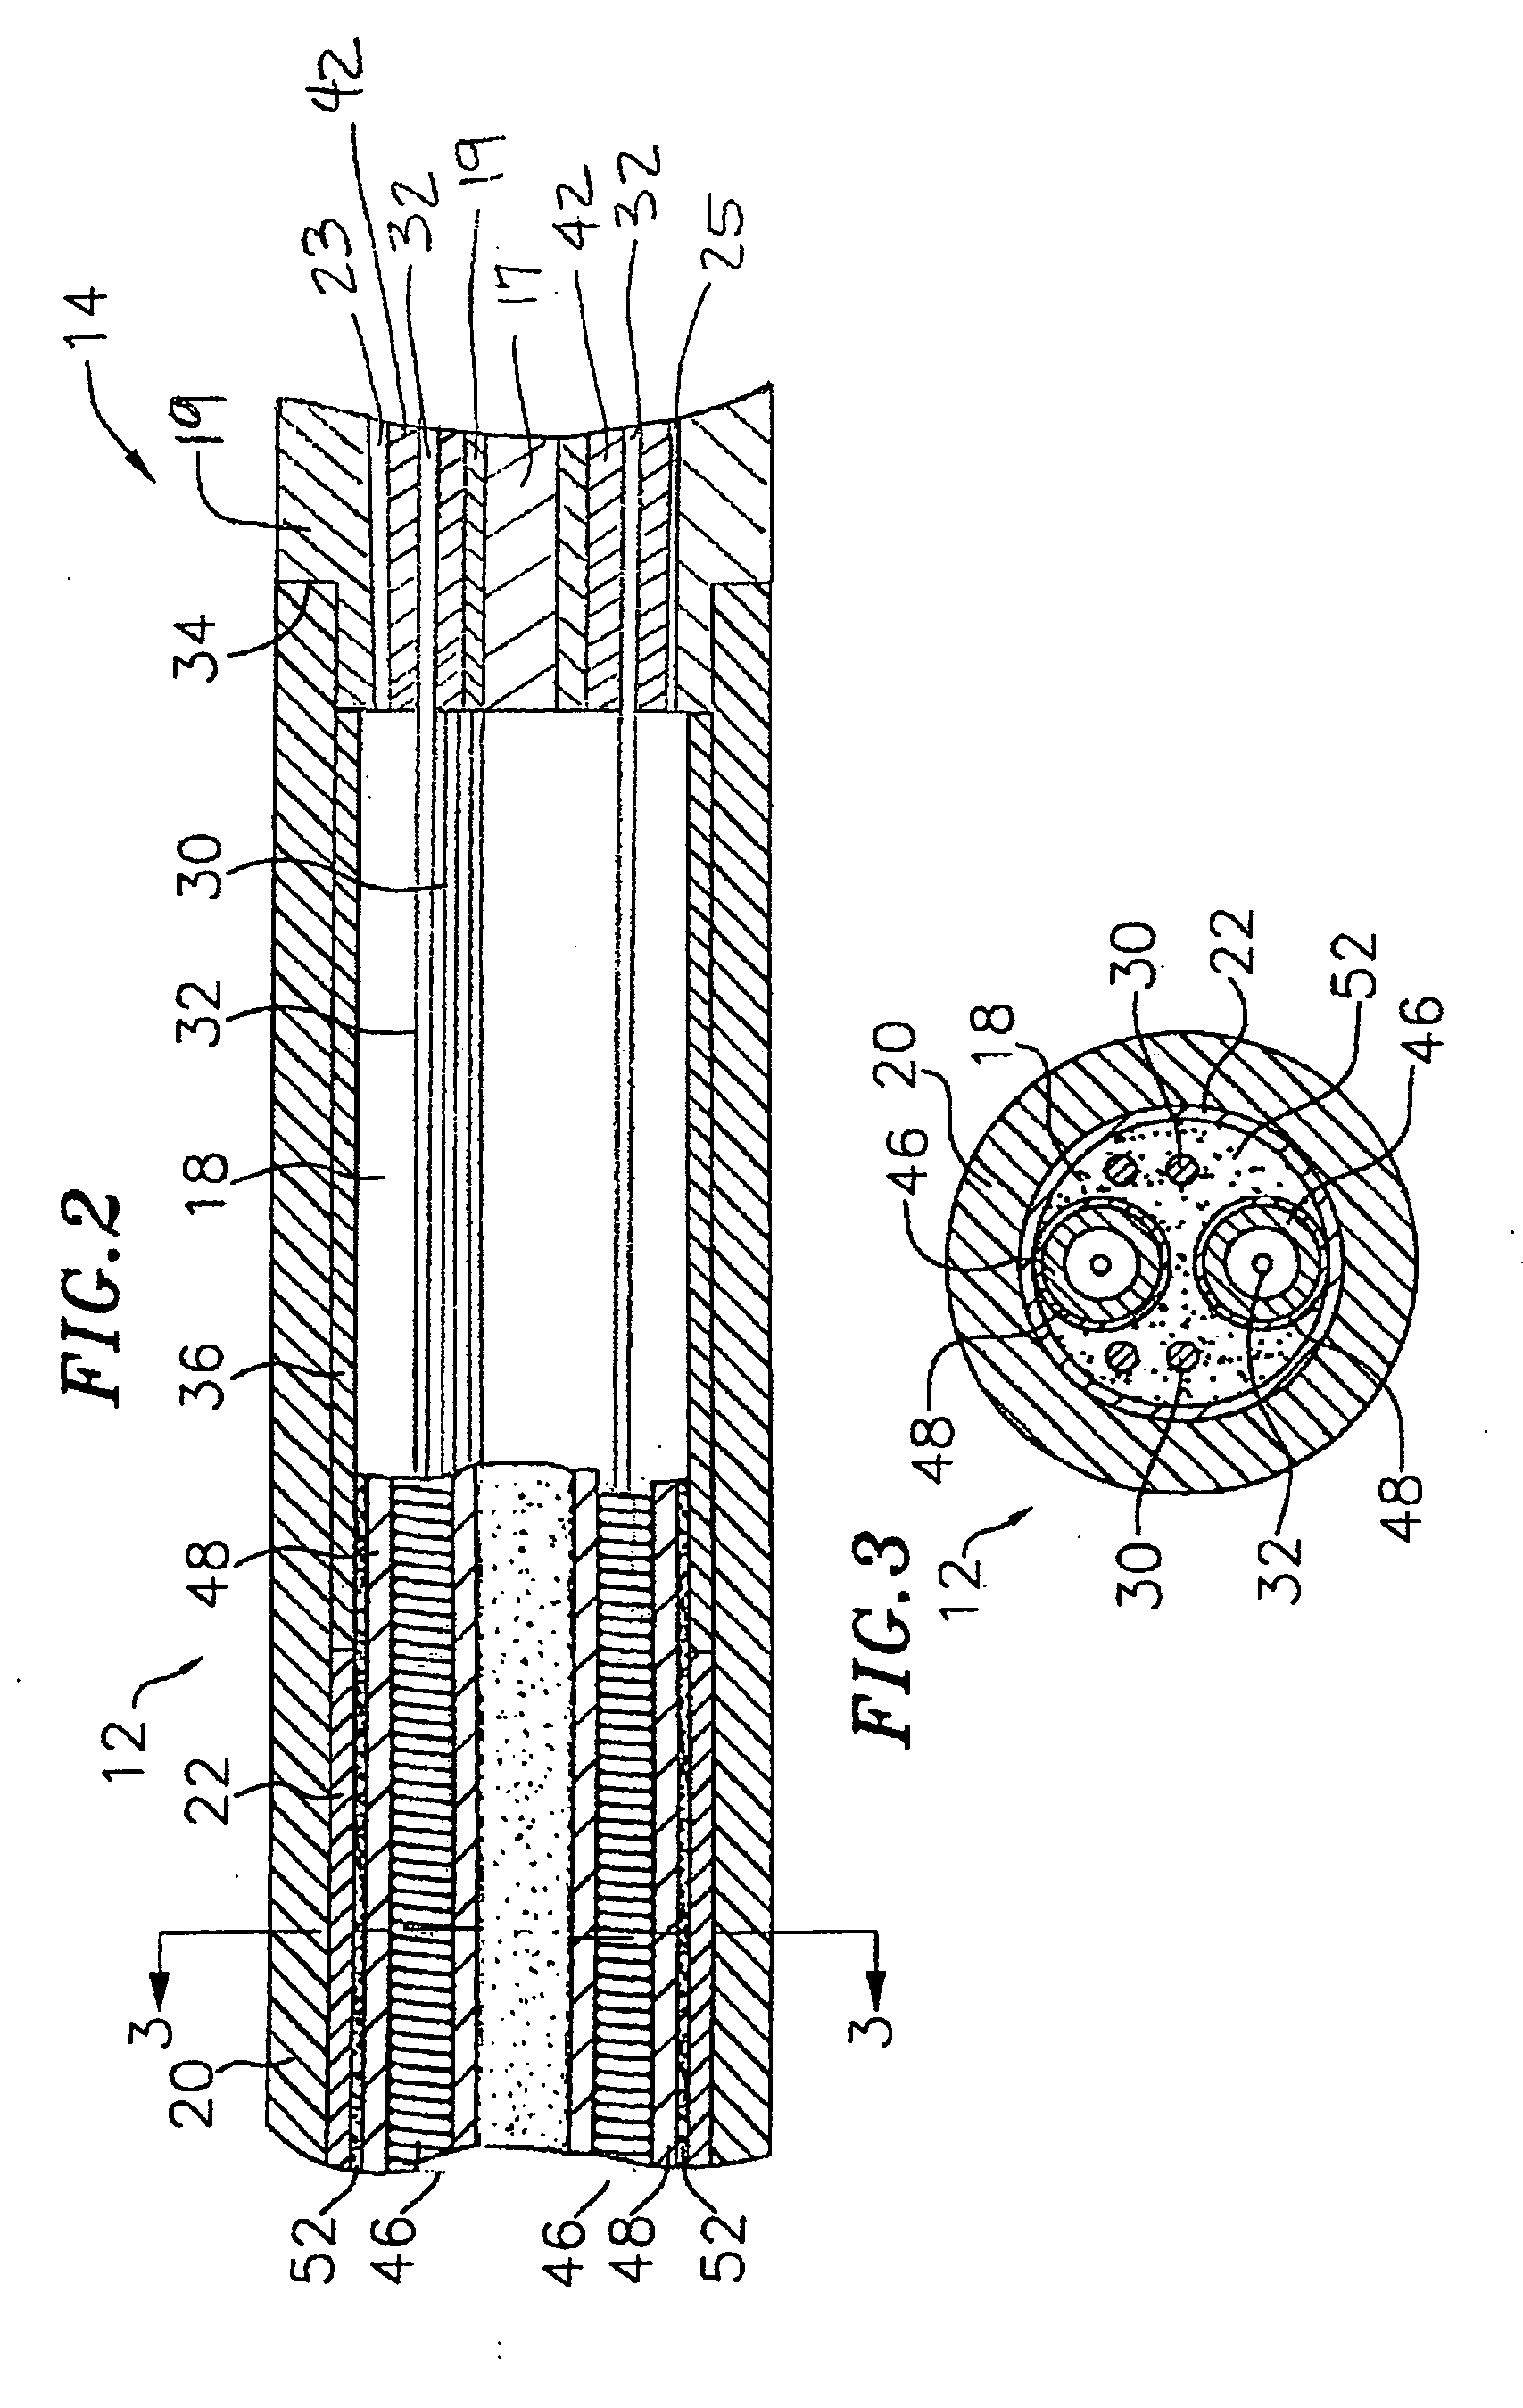 Steerable catheter with in-plane deflection